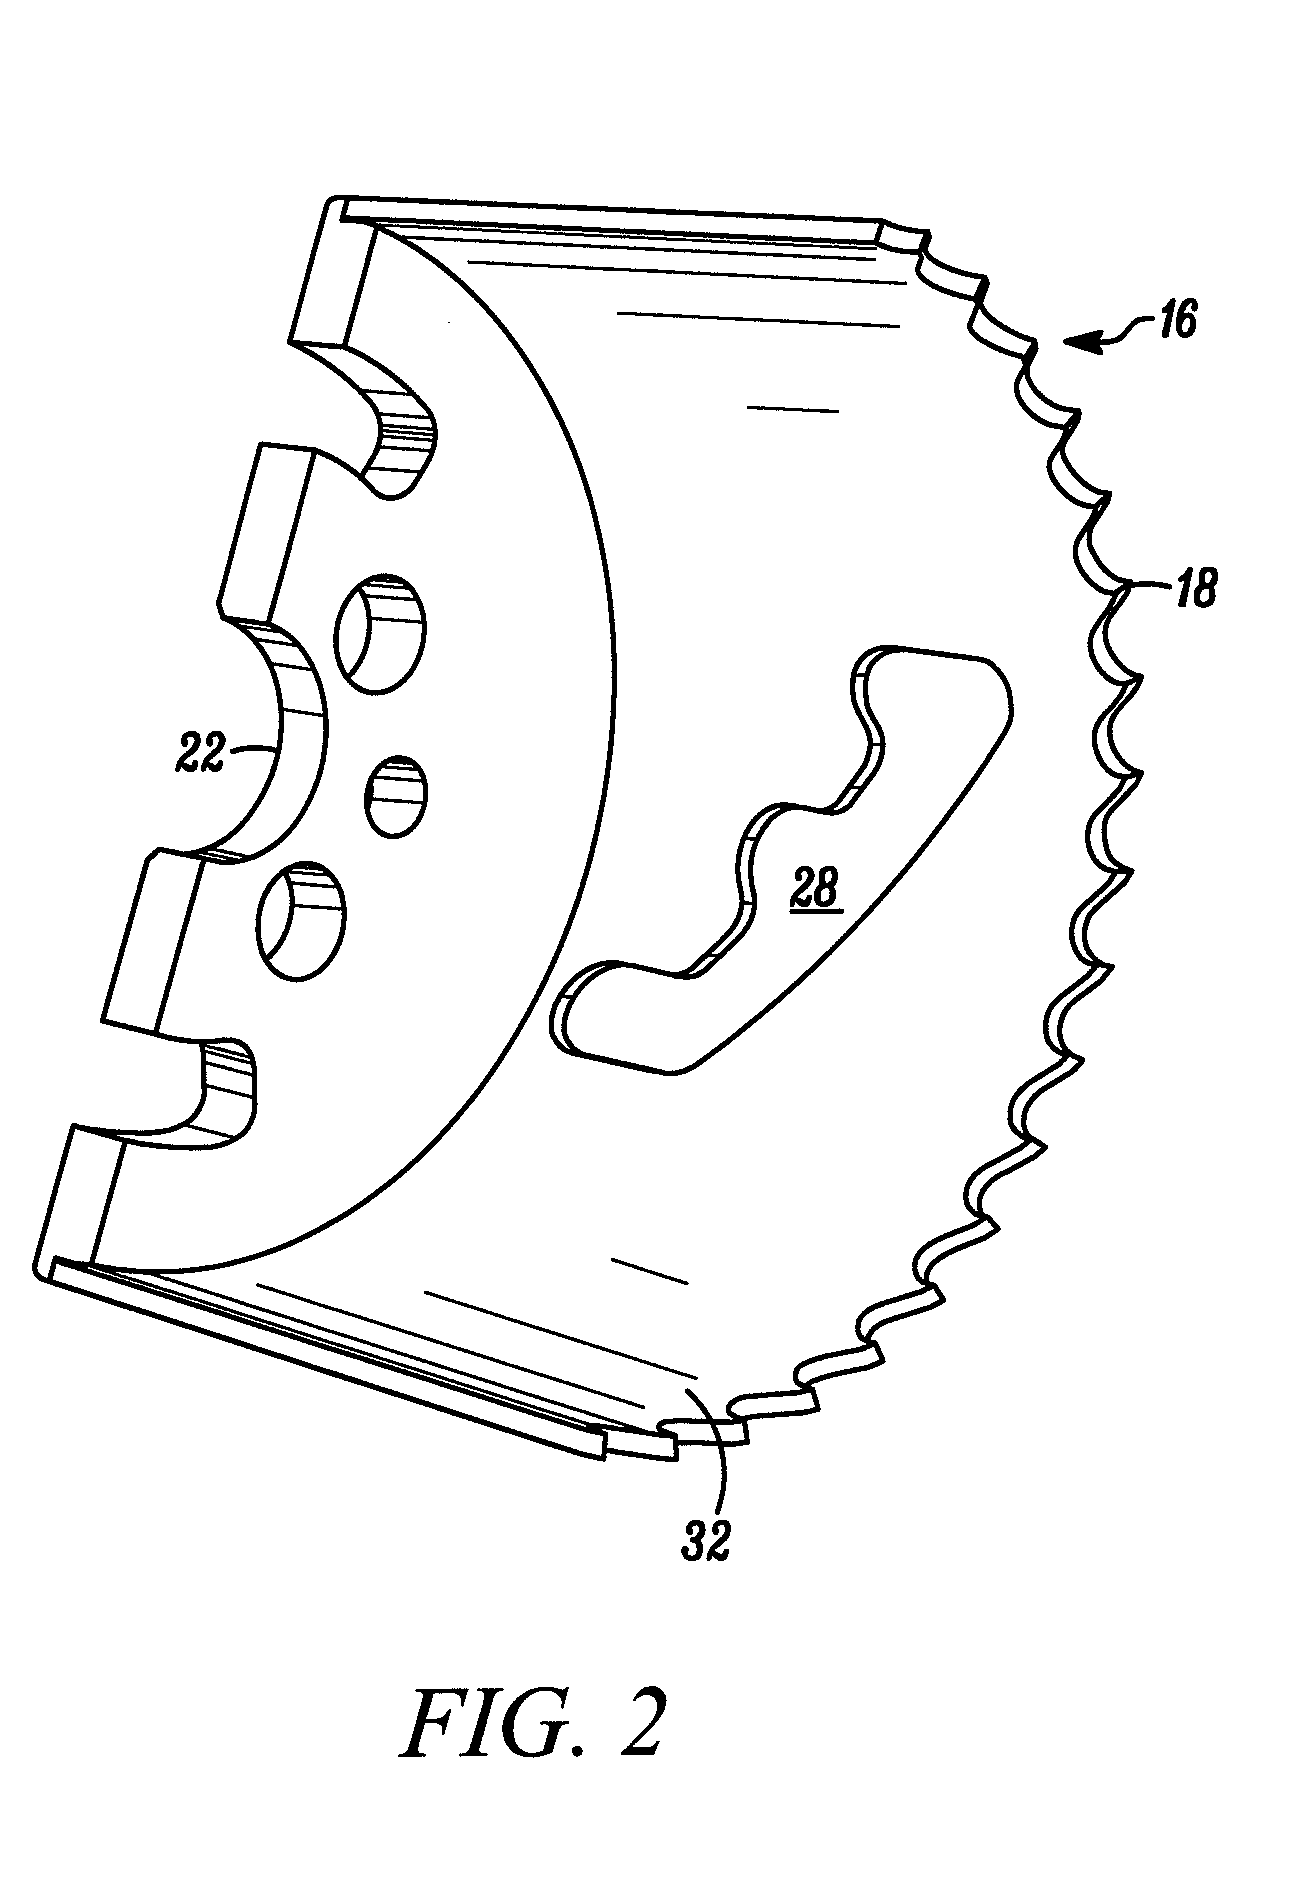 Hole cutter with extruded cap